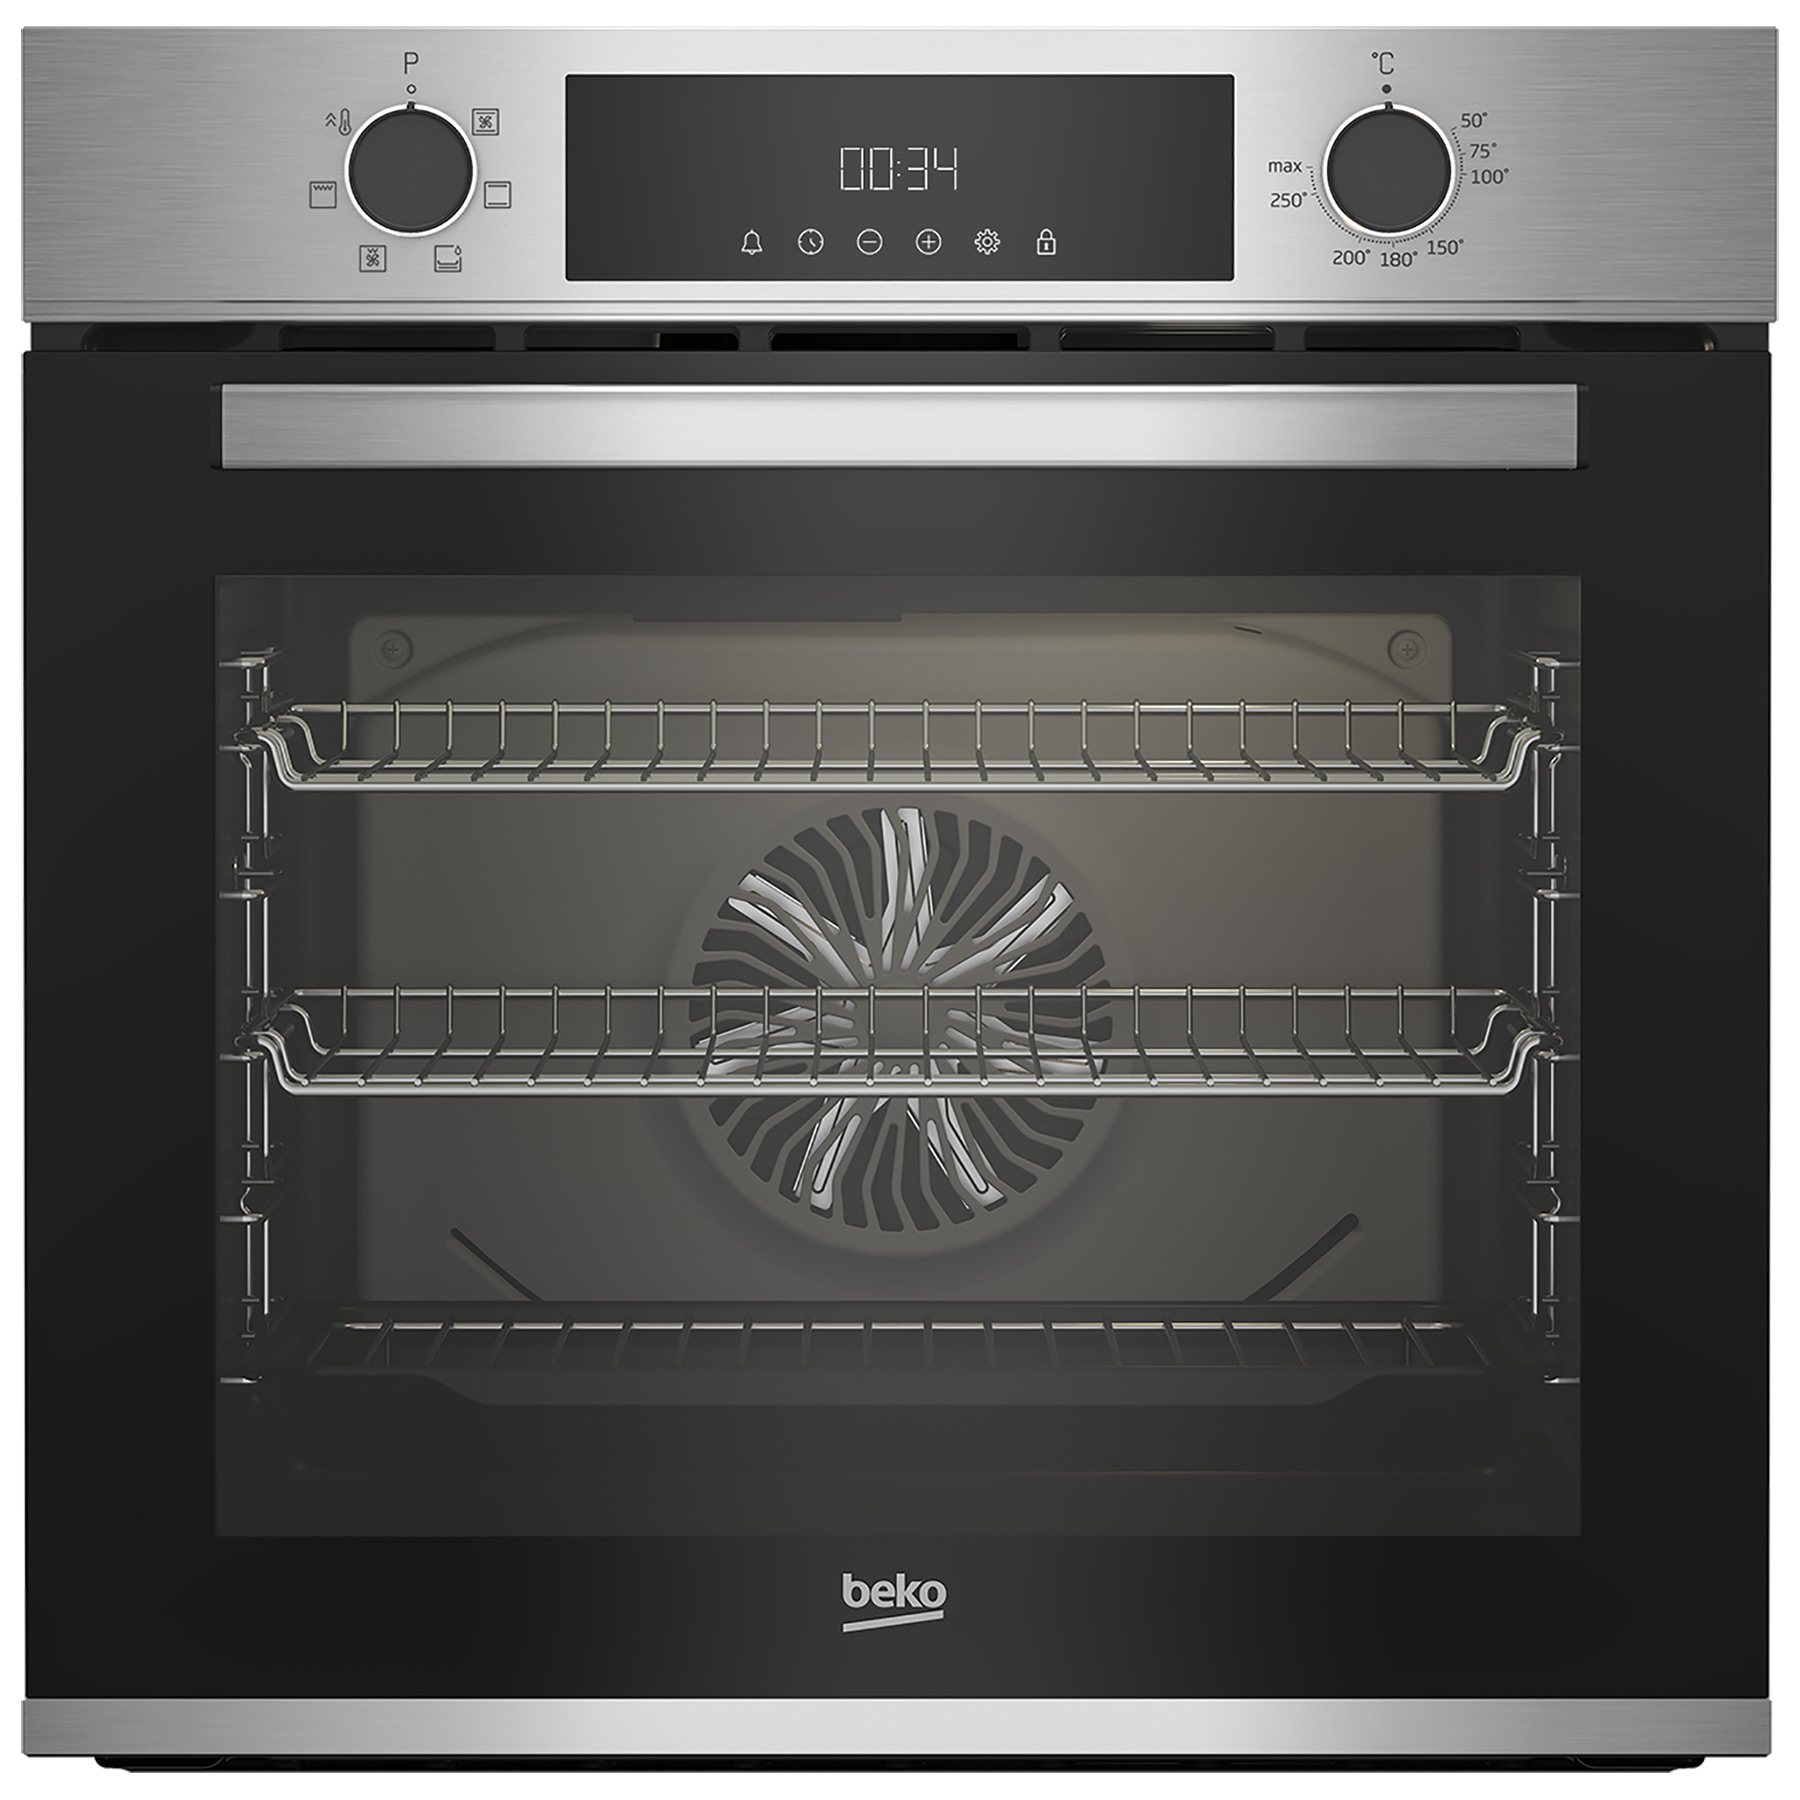 Image of Beko CIMY91X Built In Electric Single Oven in St Steel 73L A Rated